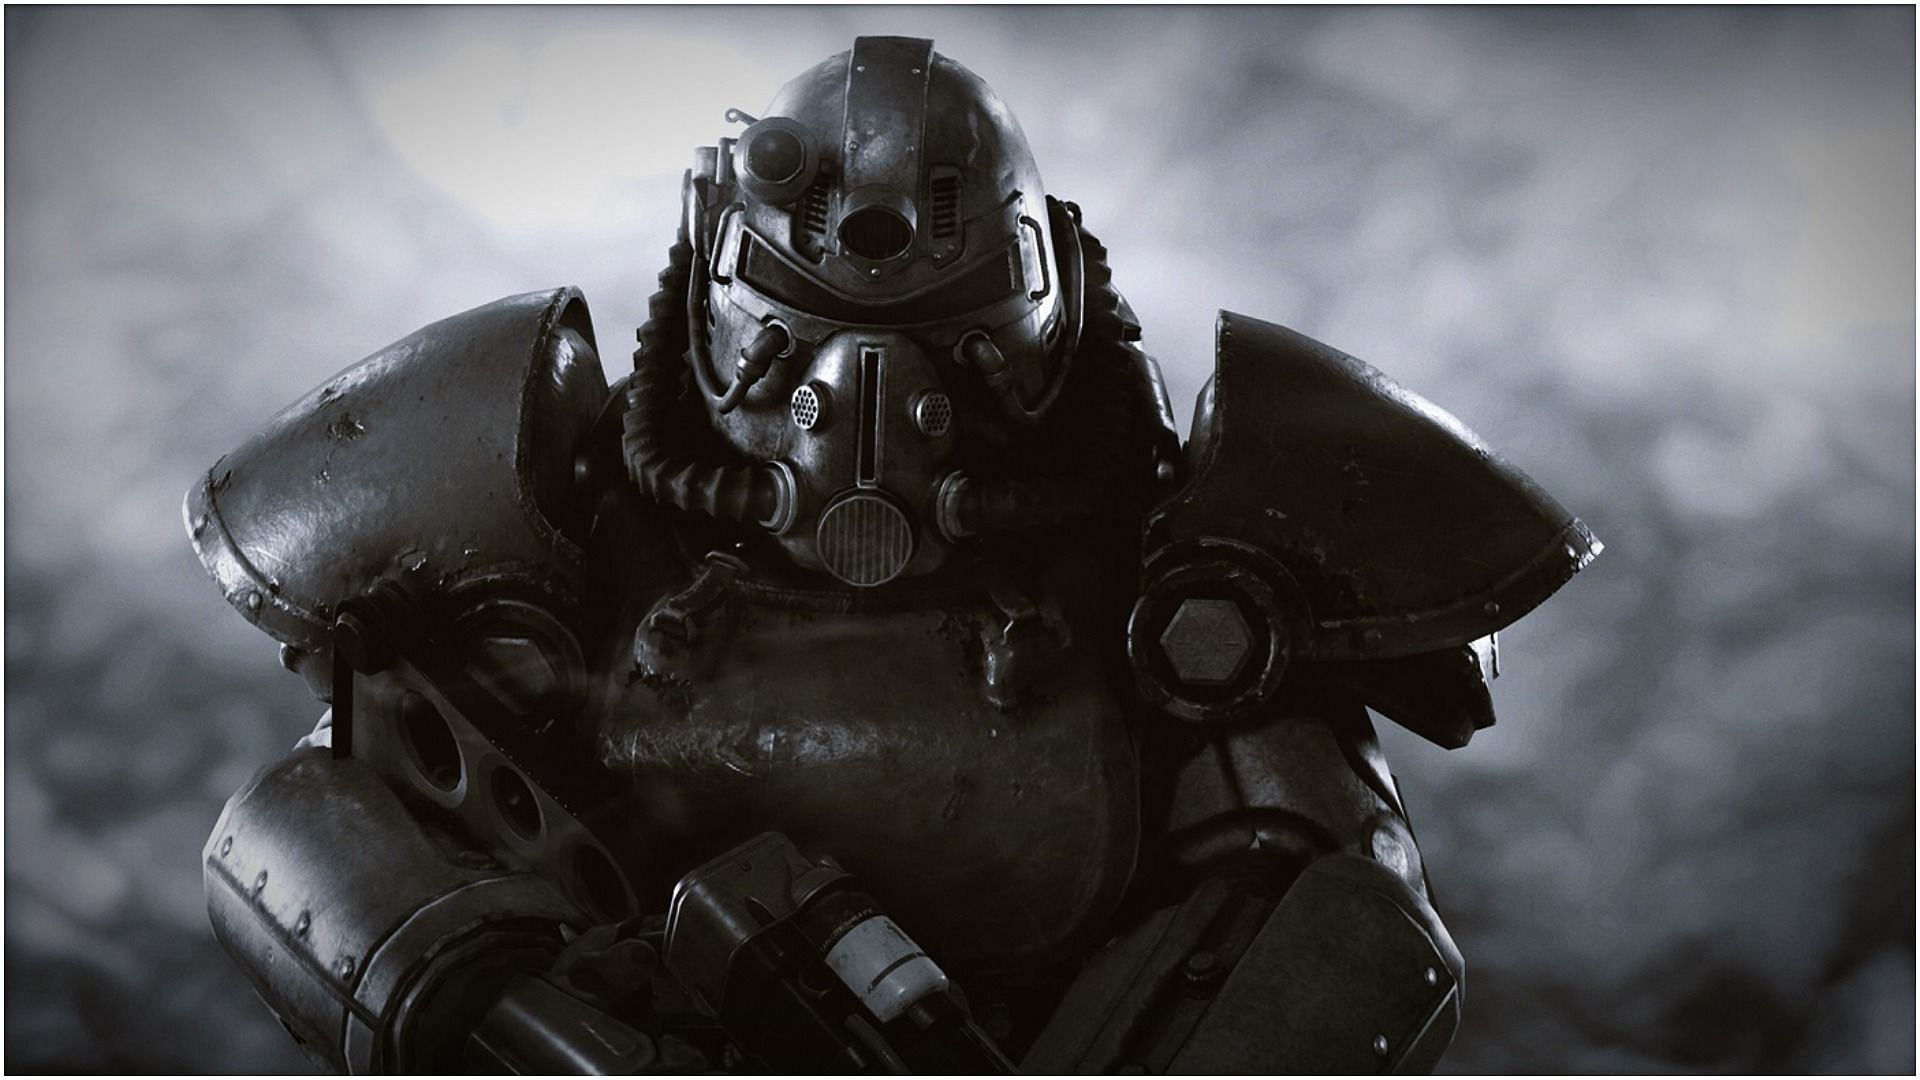 Fallout 5 is coming, just not in this decade (Image via Bethesda)